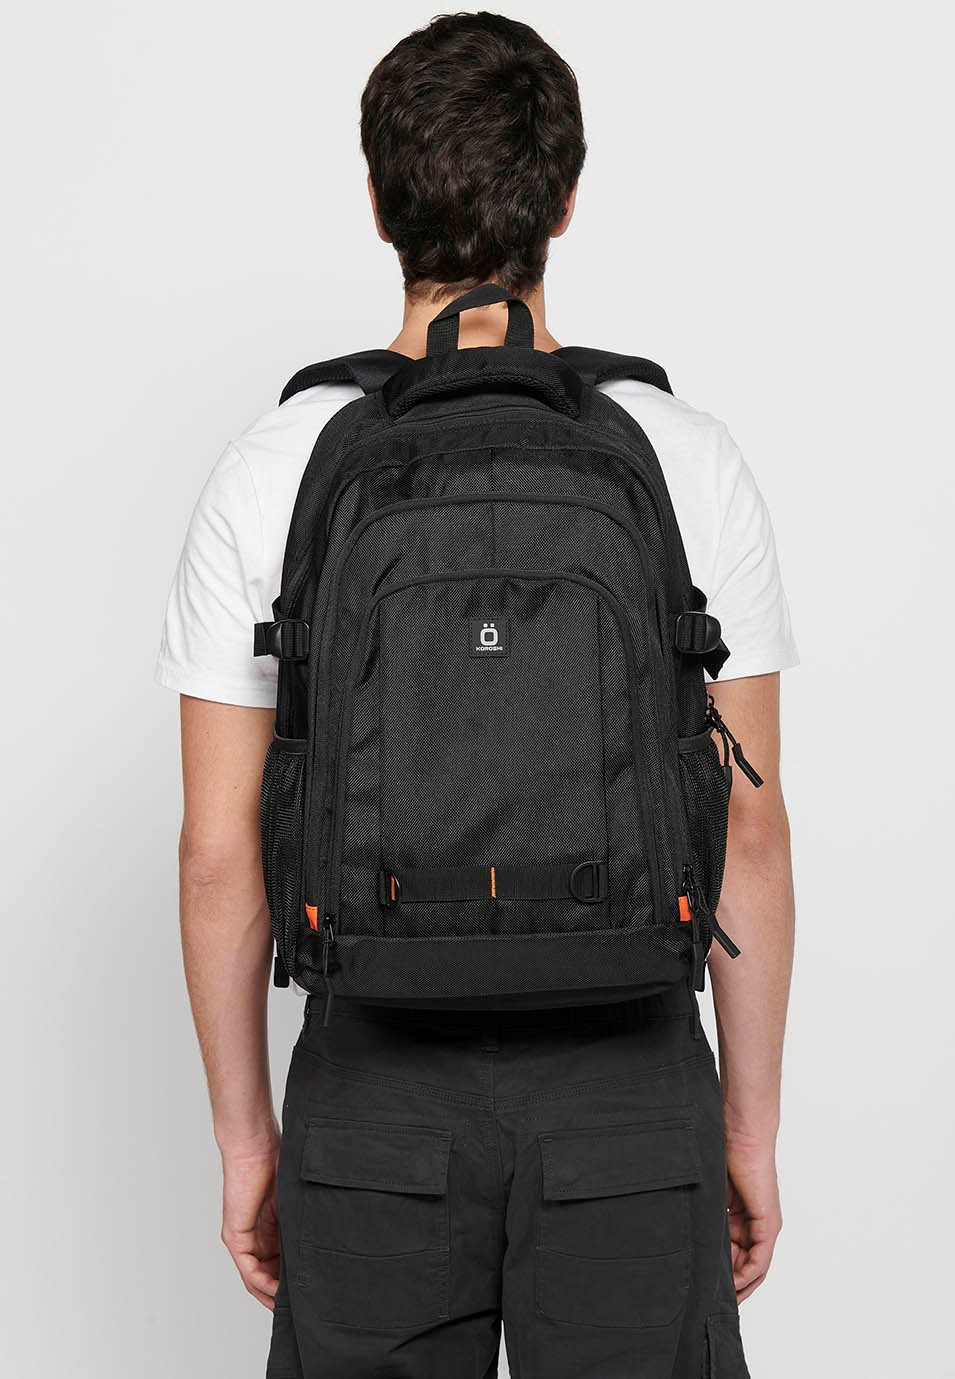 Koröshi backpack with three zippered compartments, one for a laptop, with black interior pockets 7